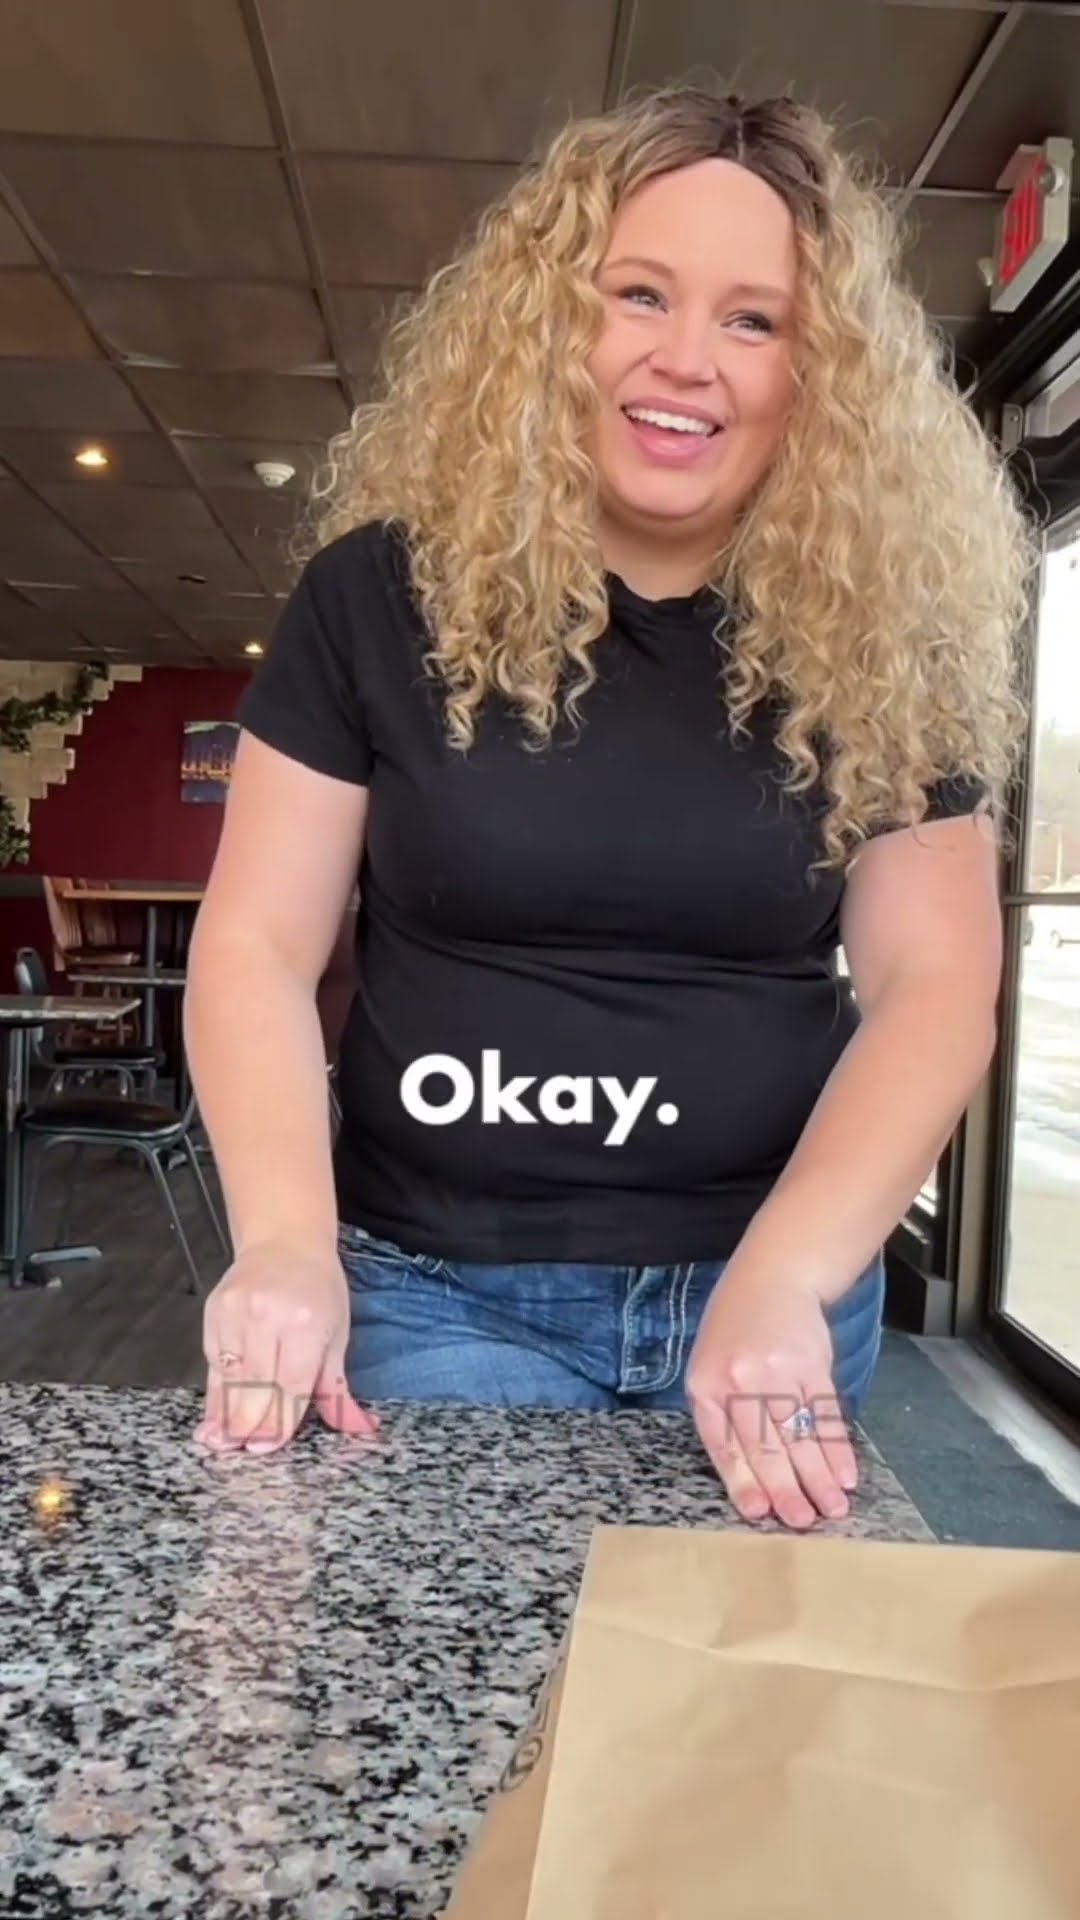 Waitress Demands A 30% Tip Or She Takes His Food Back!